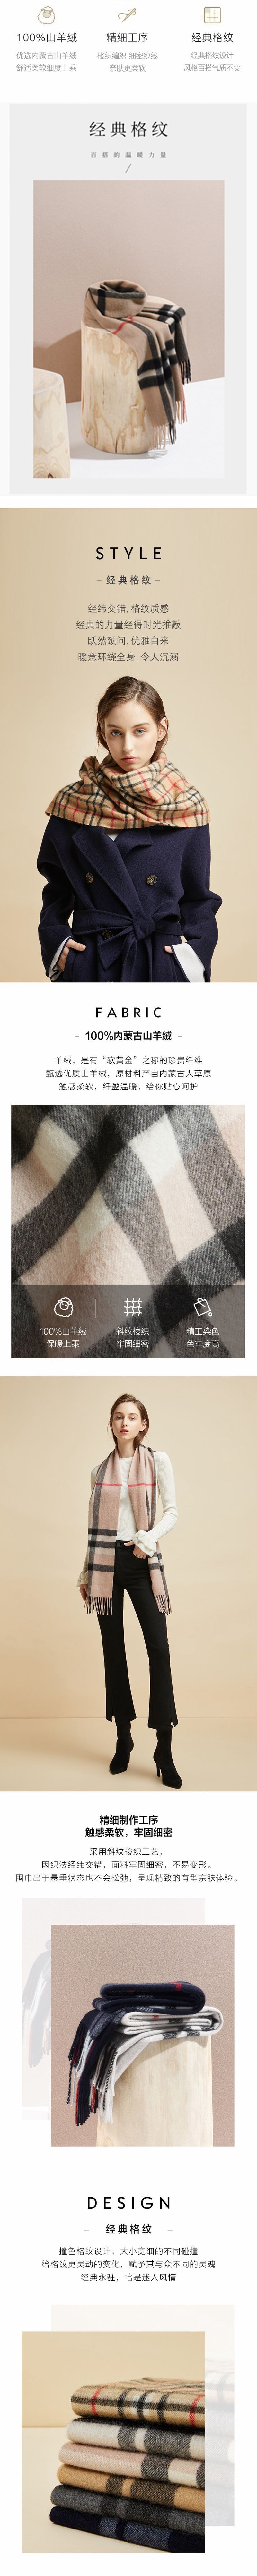 Classic Check Pure Cashmere Scarf Small grid Camel 170cm*30cm [5-7 Days U.S. Free Shipping]